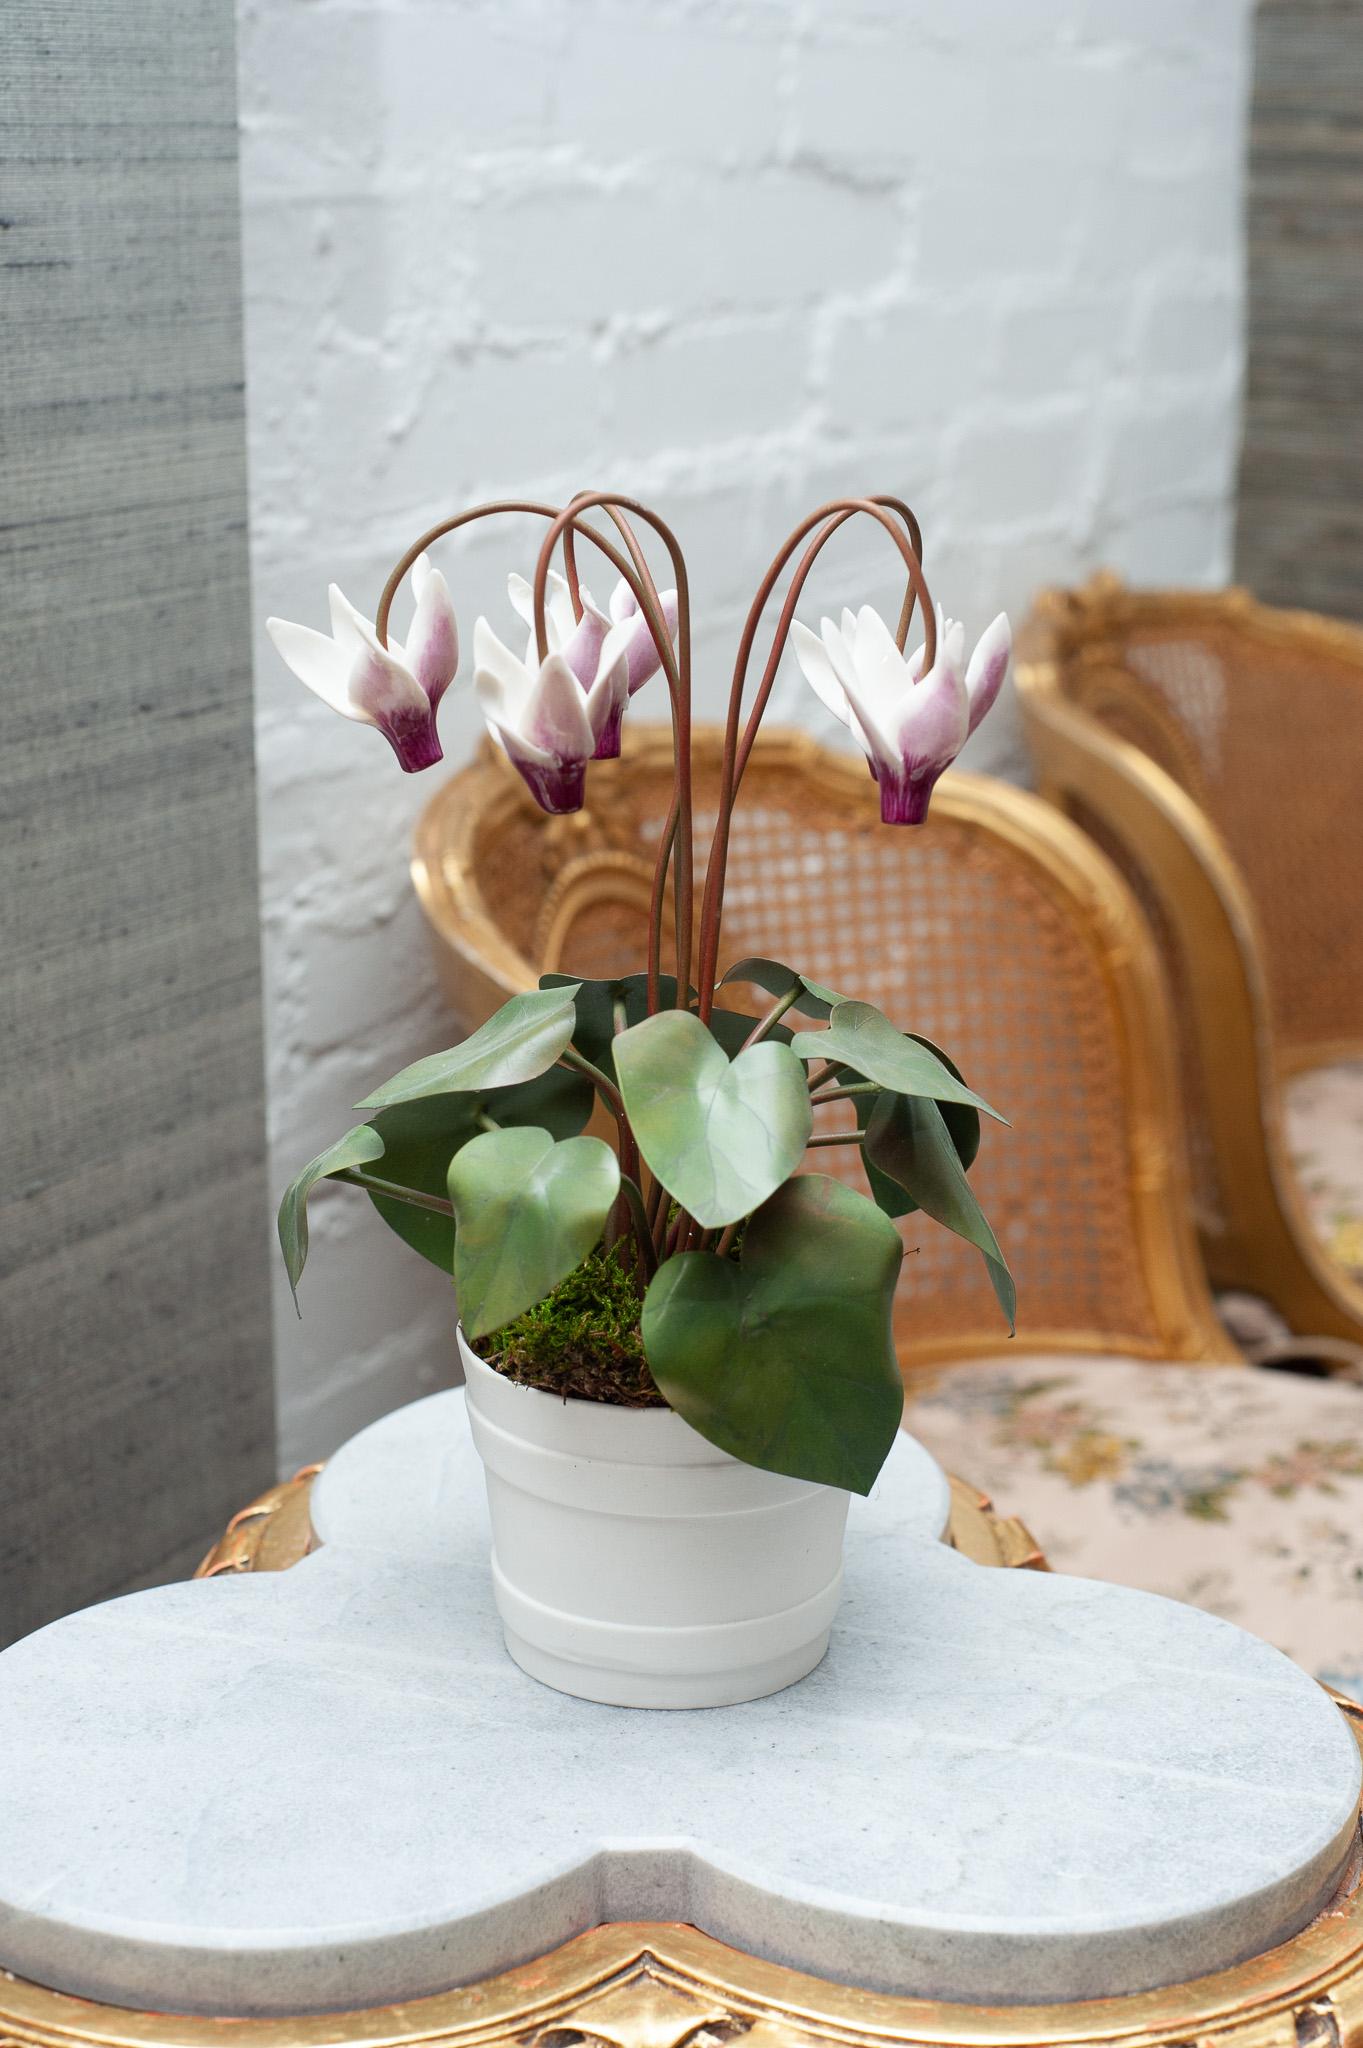 Samuel Mazy Glazed White & Pink Porcelain Cyclamen Sculpture In New Condition For Sale In Toronto, ON